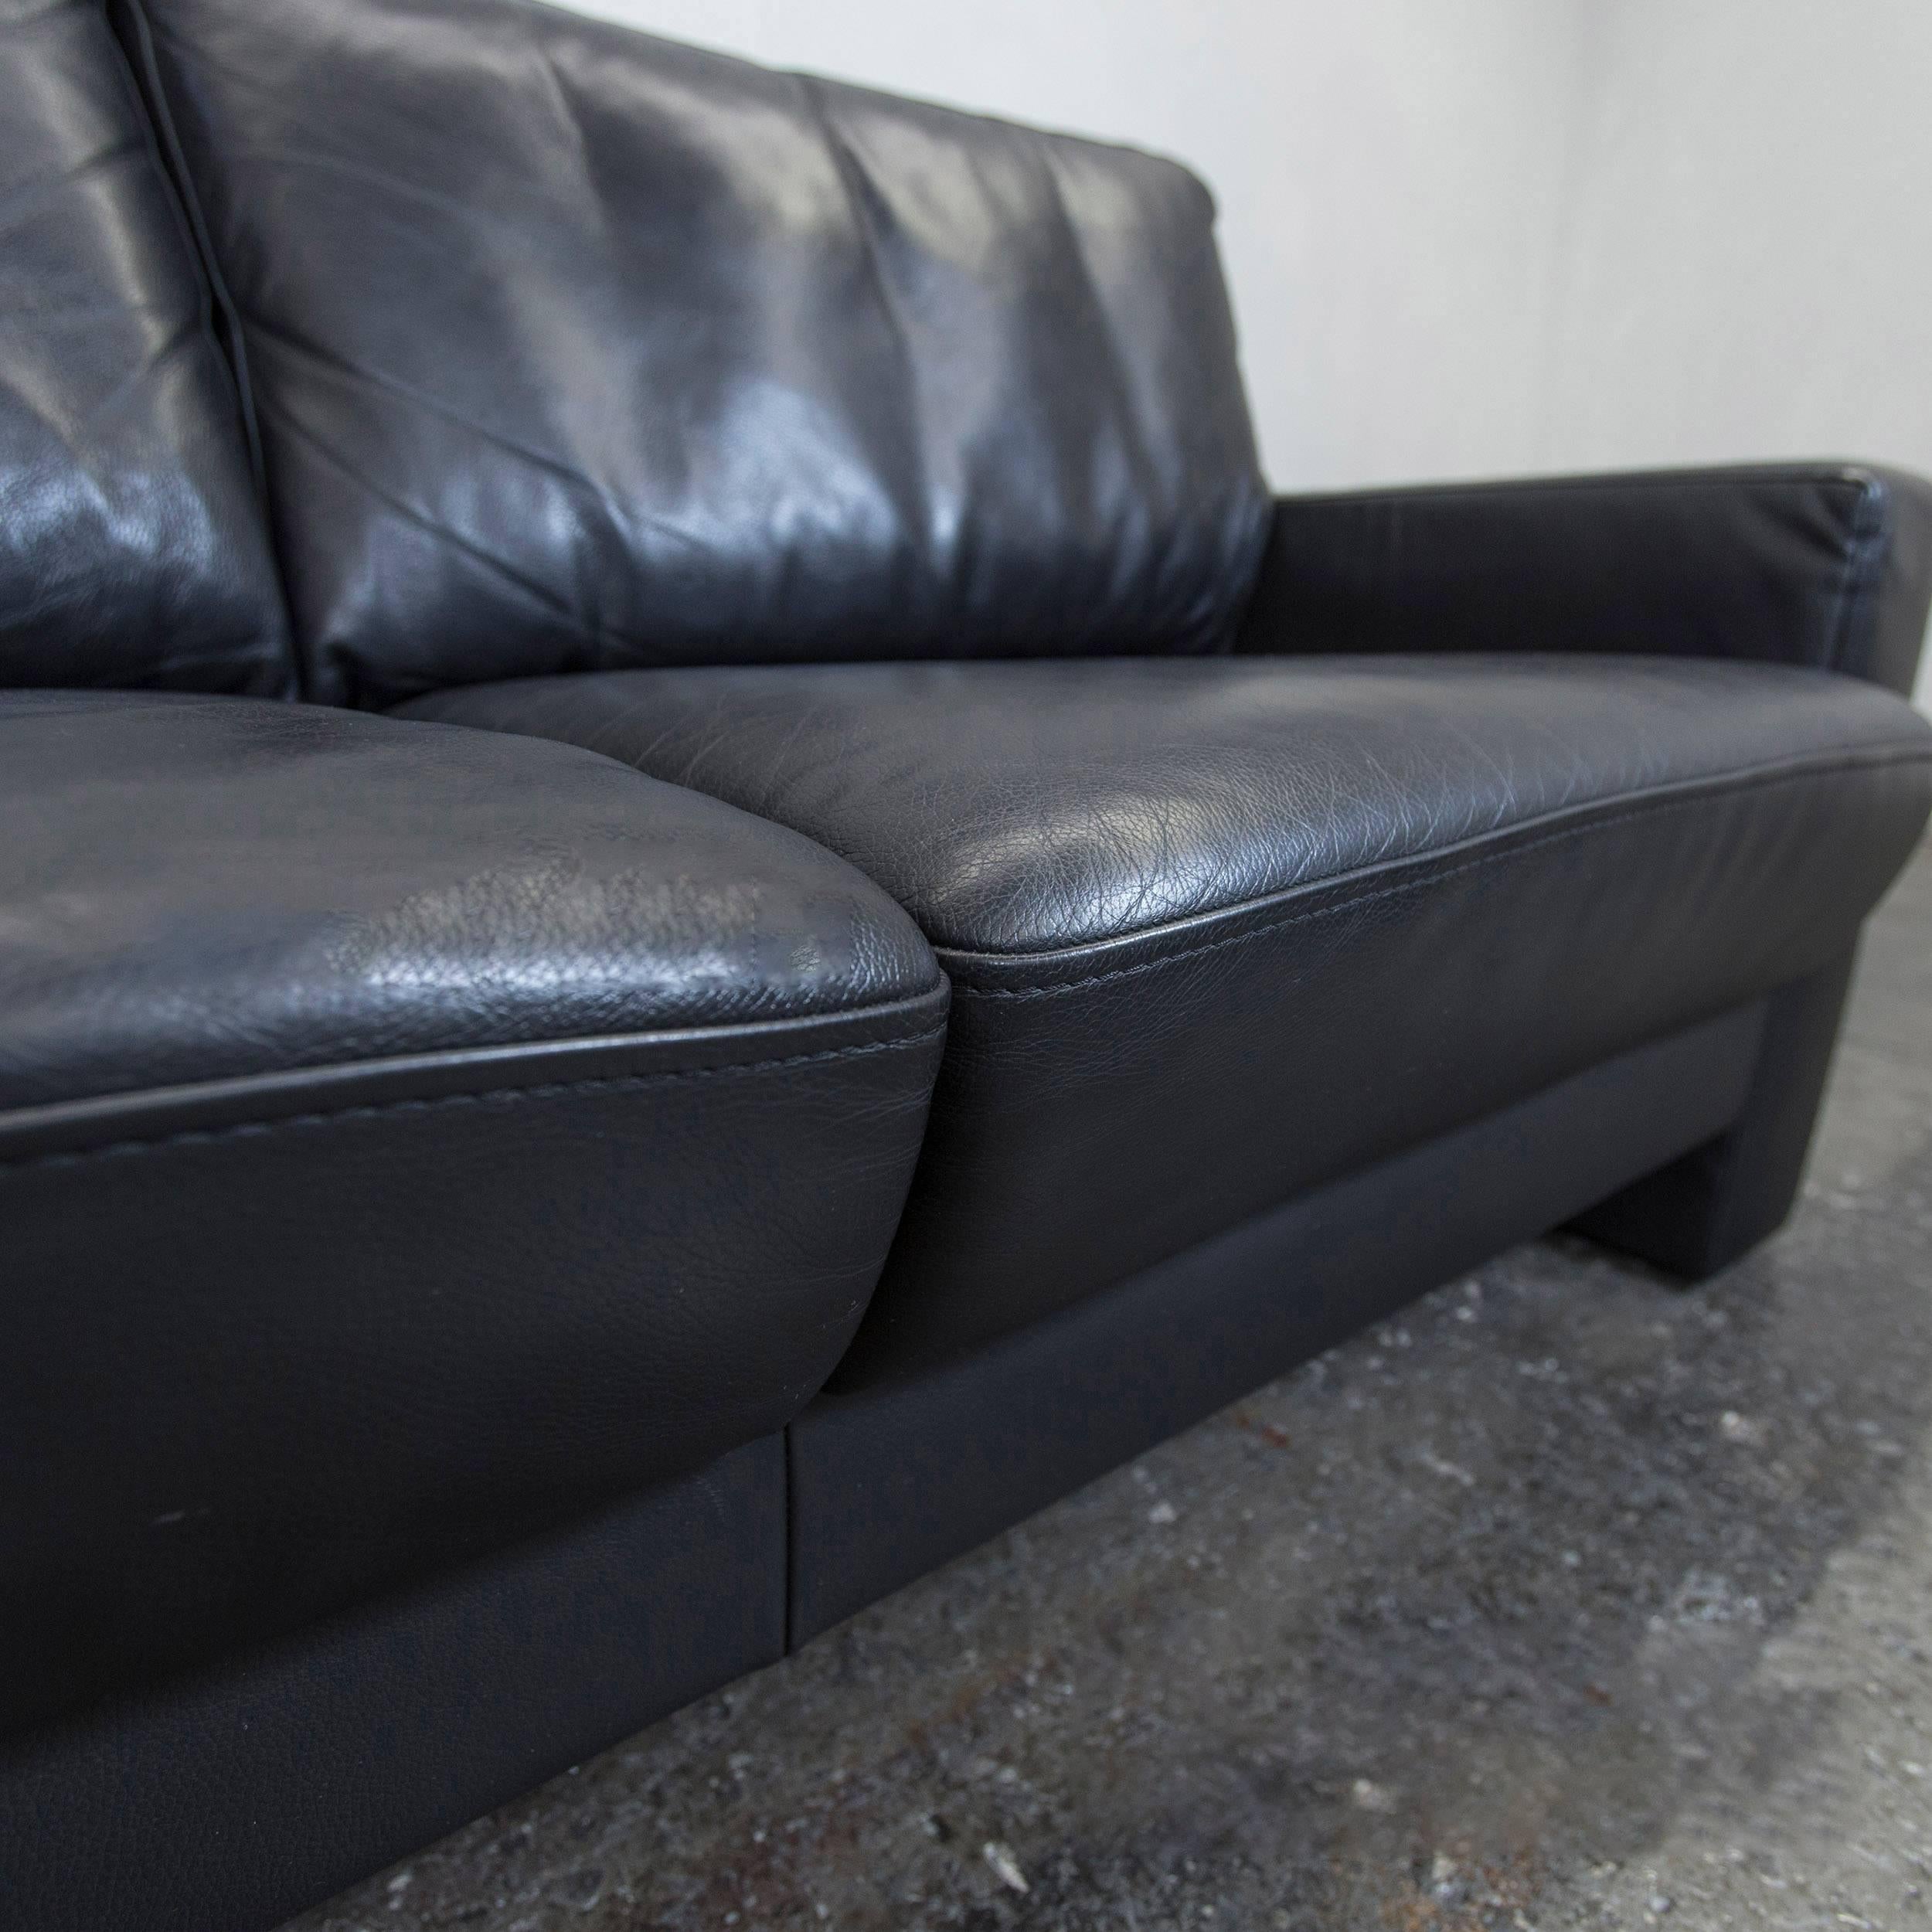 Külkens & Sohn Designer Leather Sofa Black Two-Seat Couch Modern In Good Condition For Sale In Cologne, DE